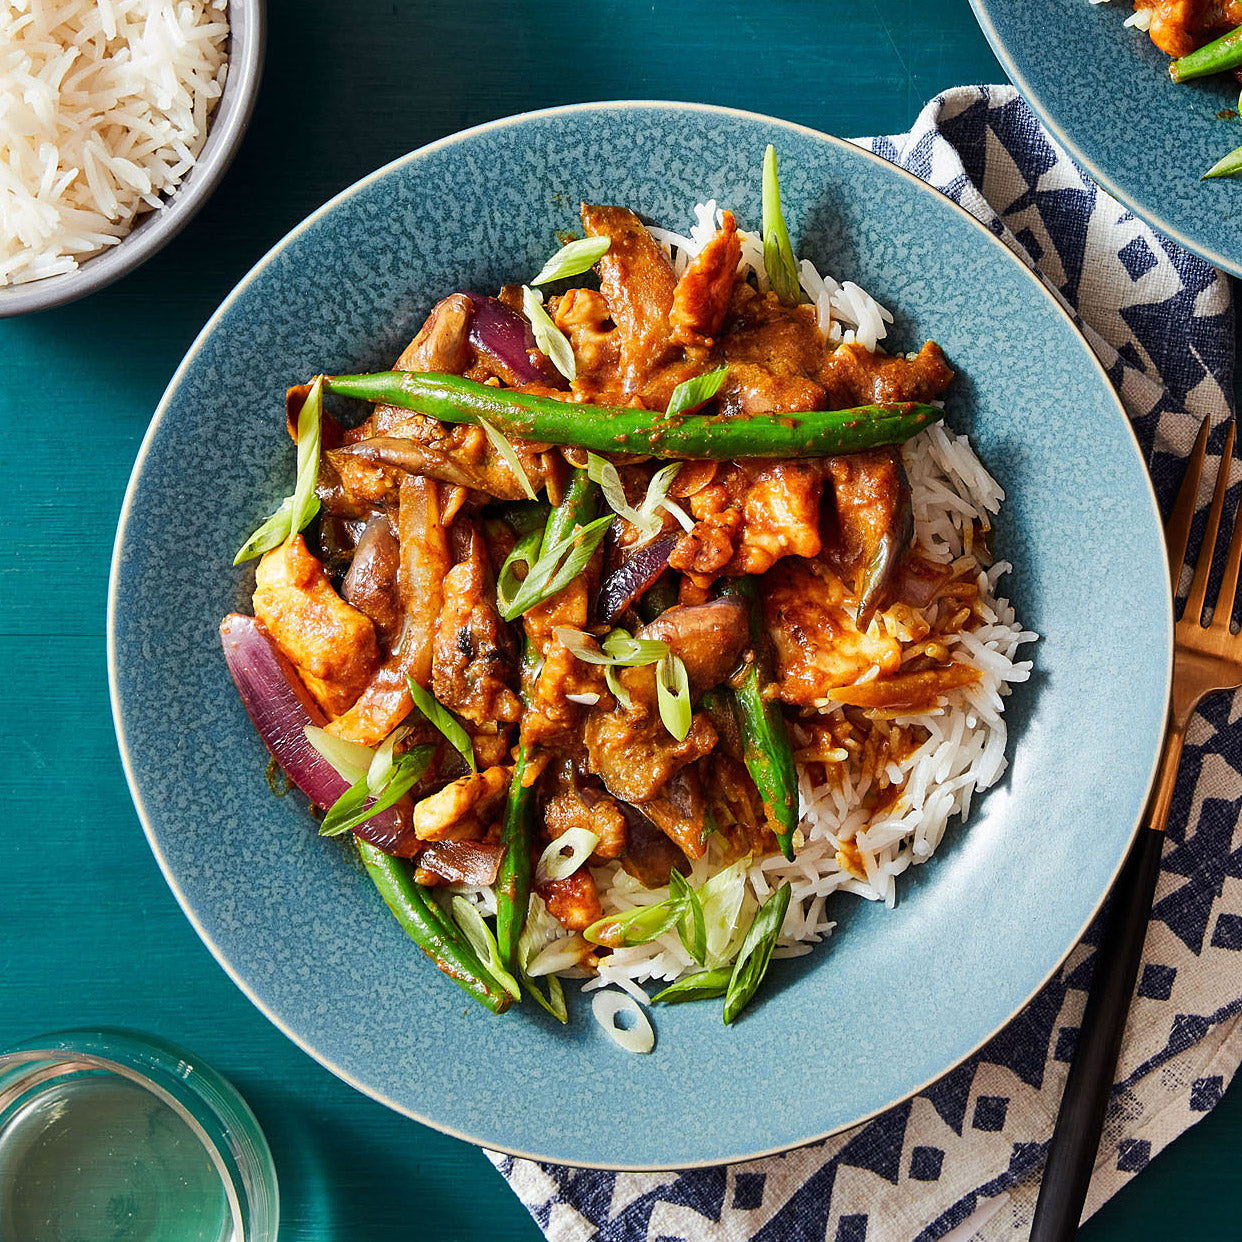 Rachael Ray's Chicken & Japanese Eggplant Curry